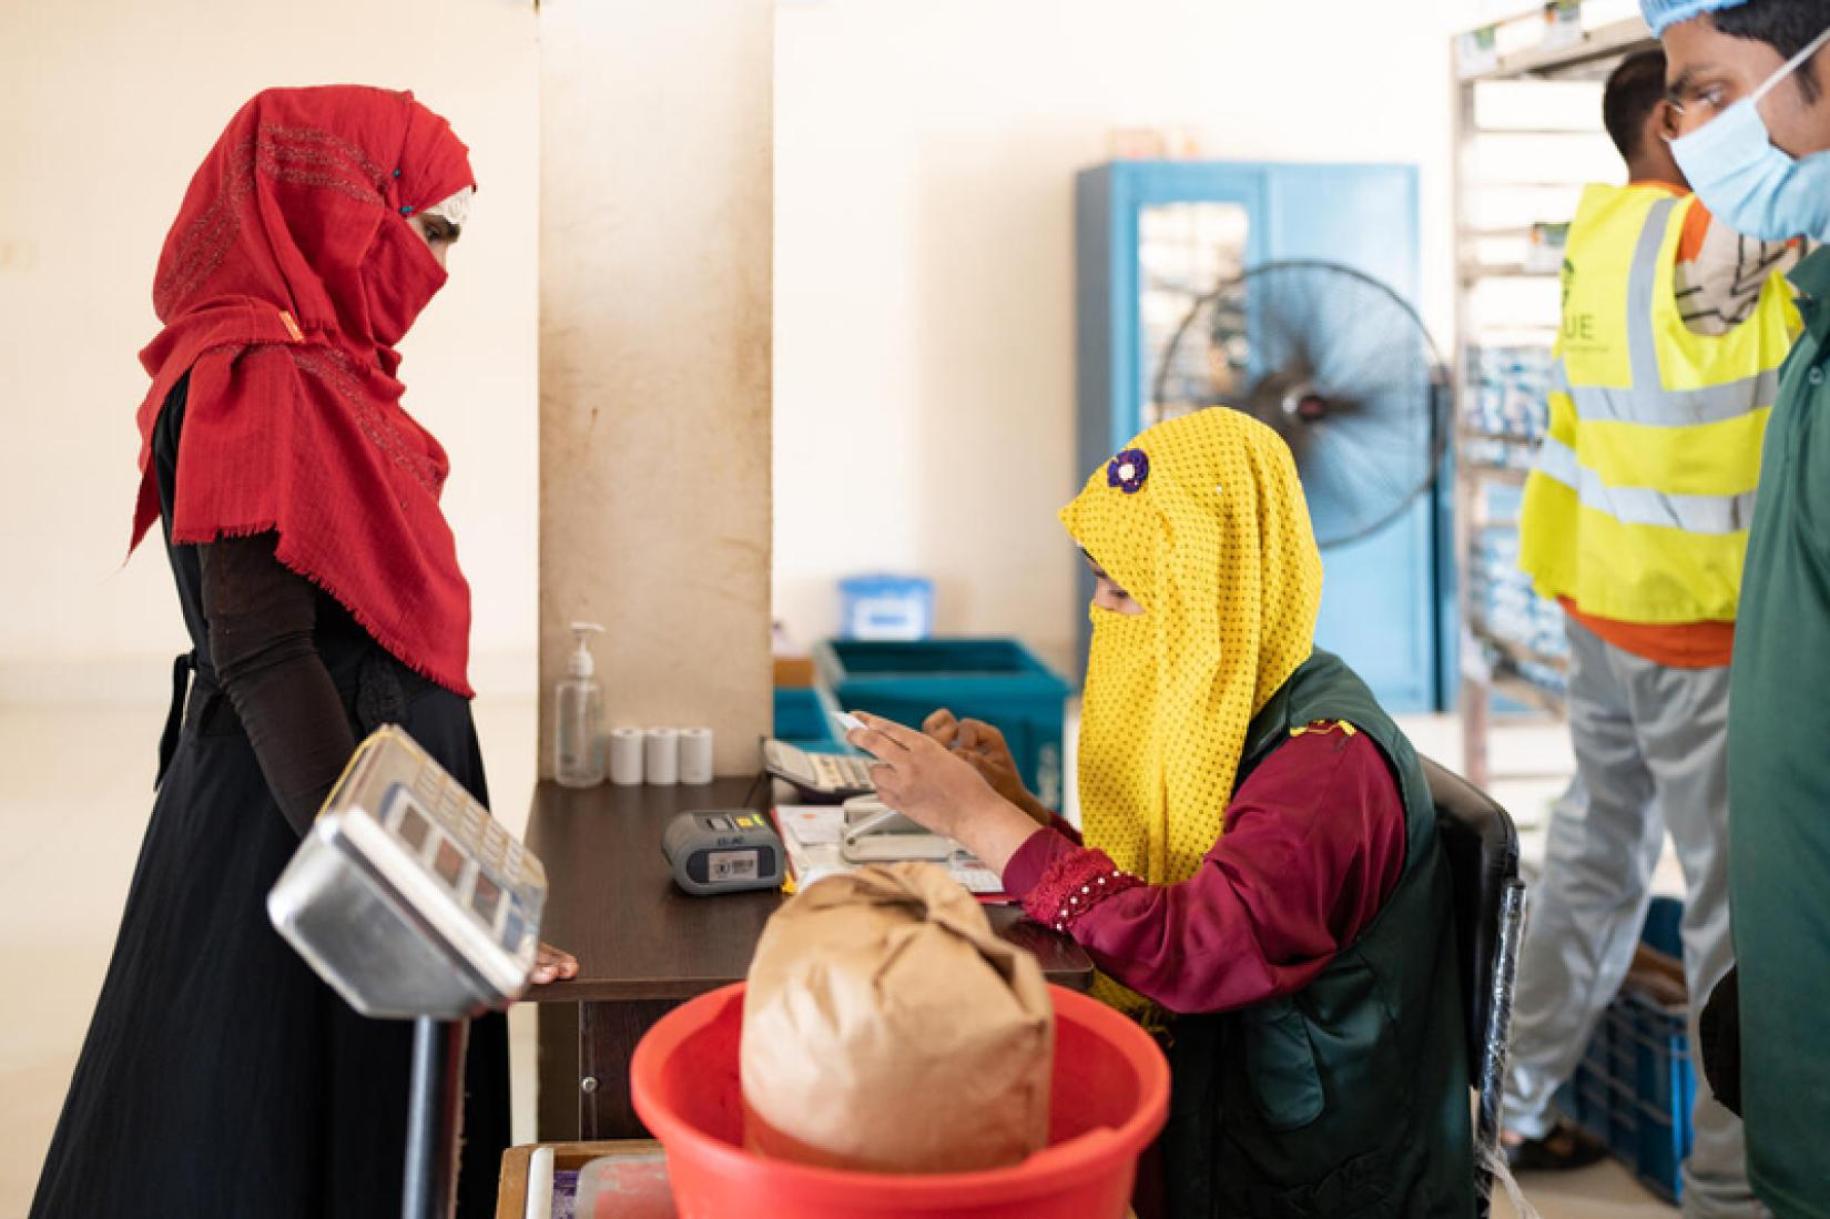 Woman in a a red veil and a black dress stands at a food distribution counter while a woman in a yellow veil and black dress weighs a bag on a weighing scale